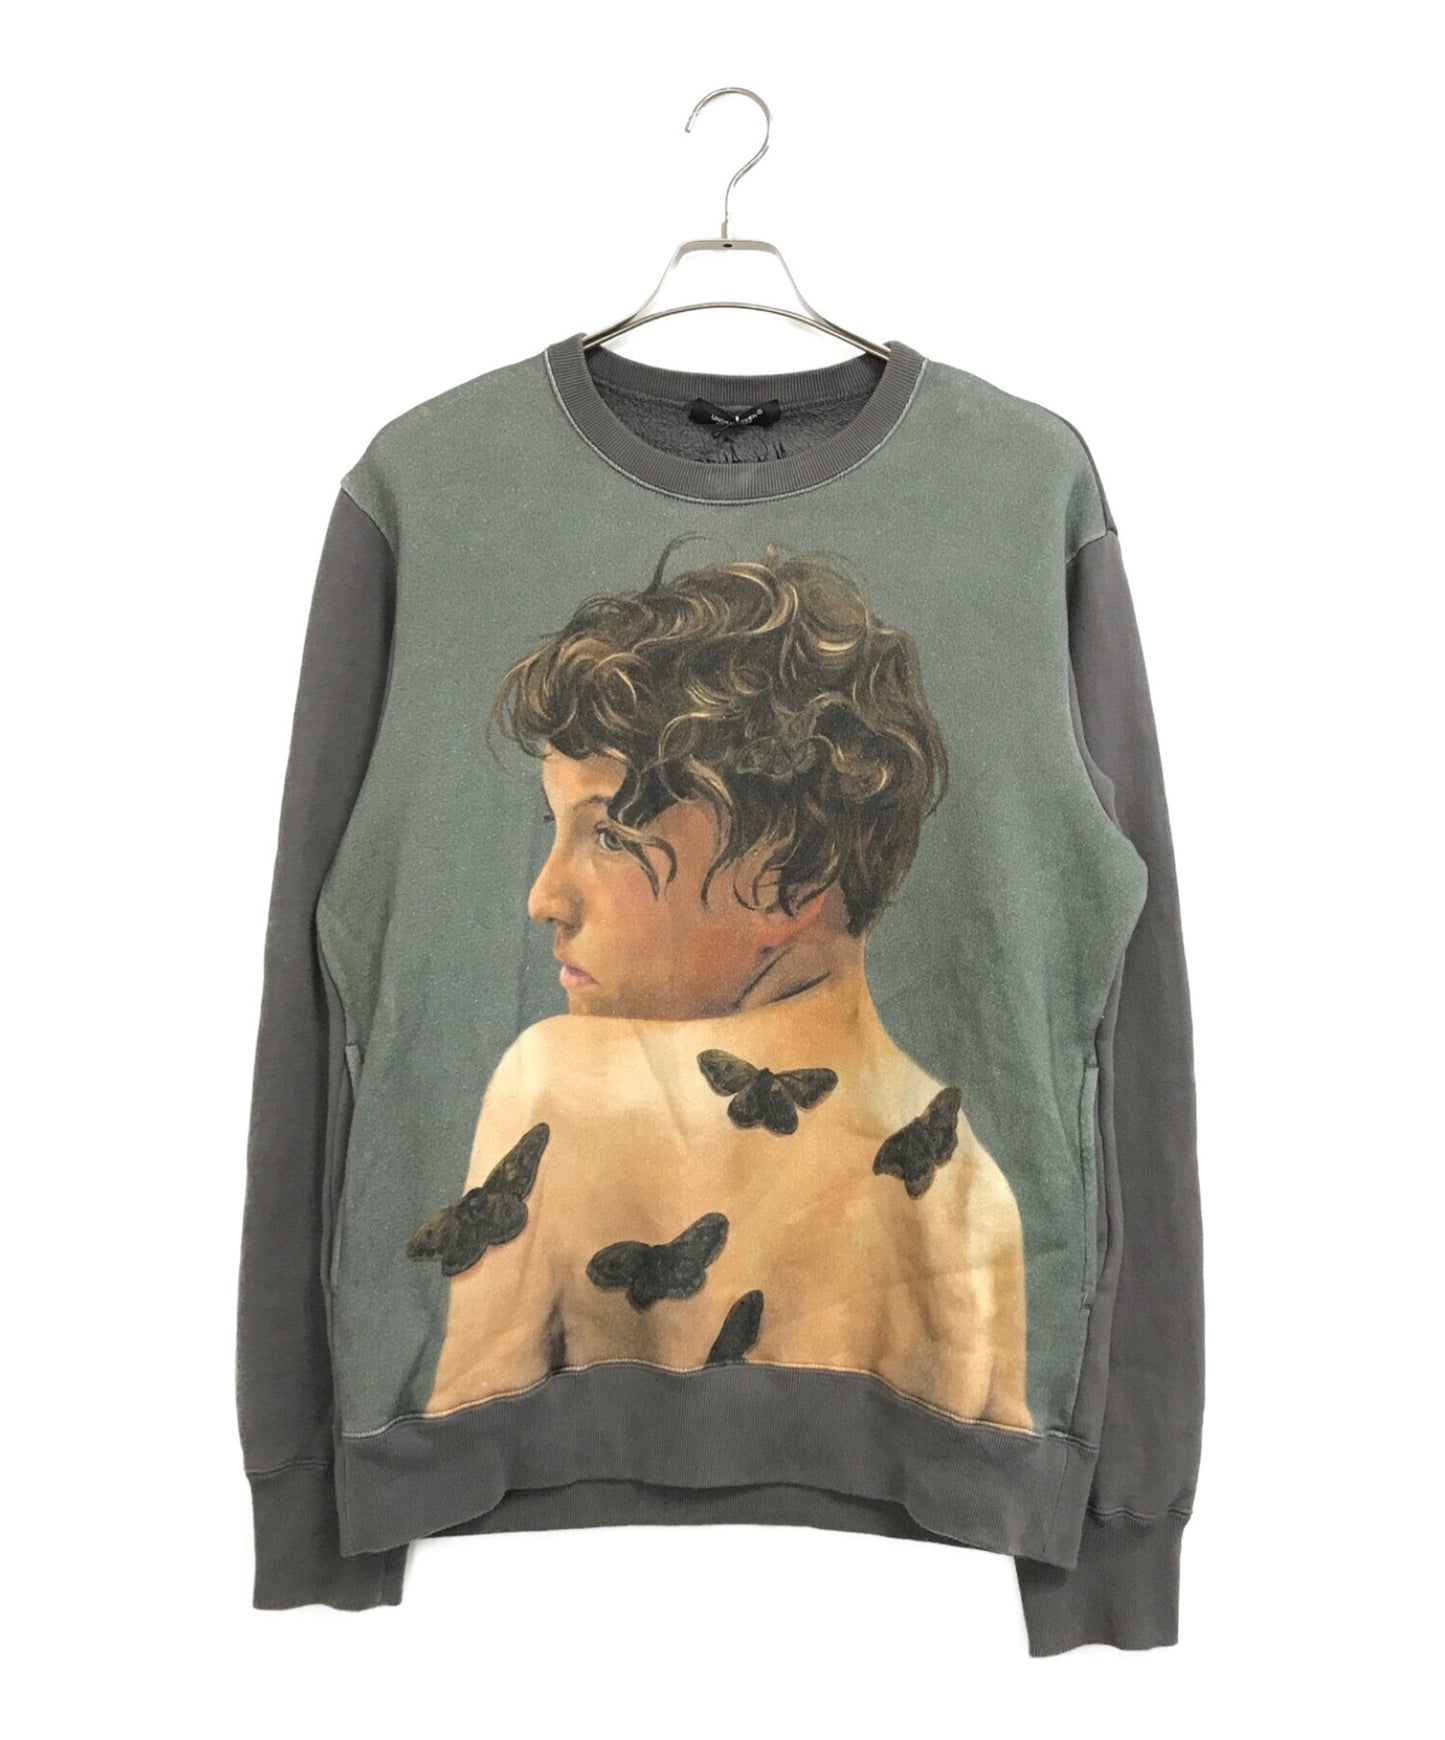 Undercover 21Aw Childs Play Sweatshirt UC2A4804-1